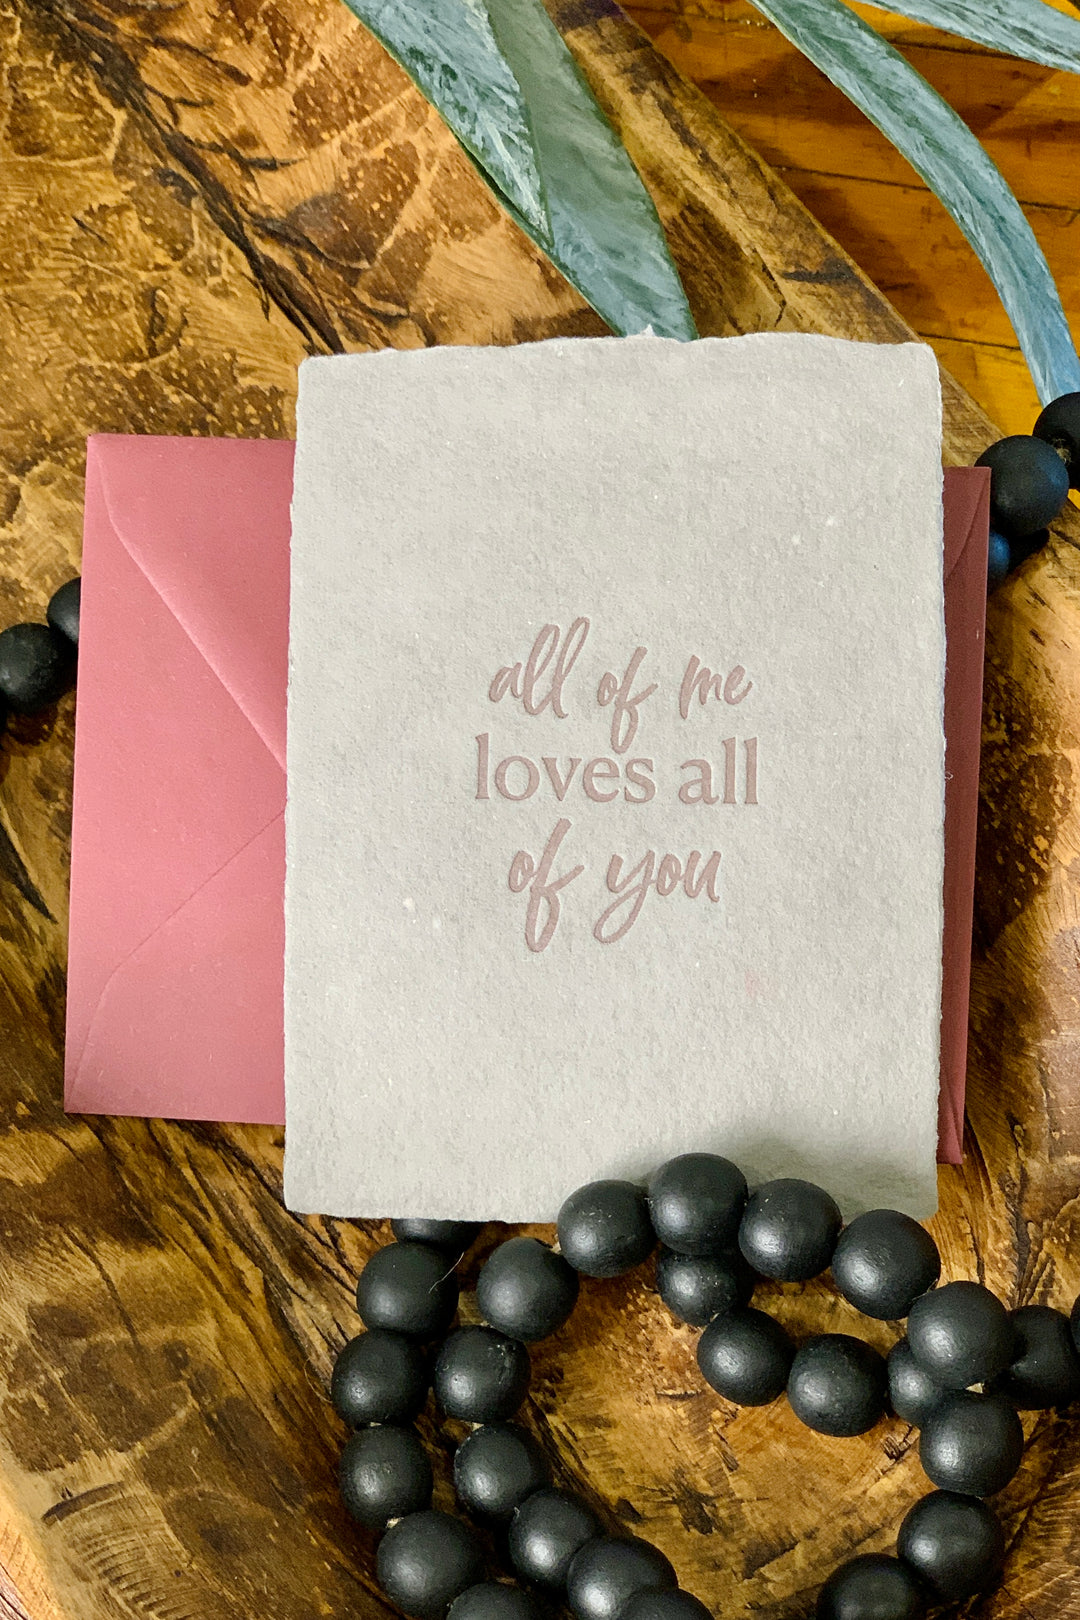 "All of me loves all of you" Romantic Card